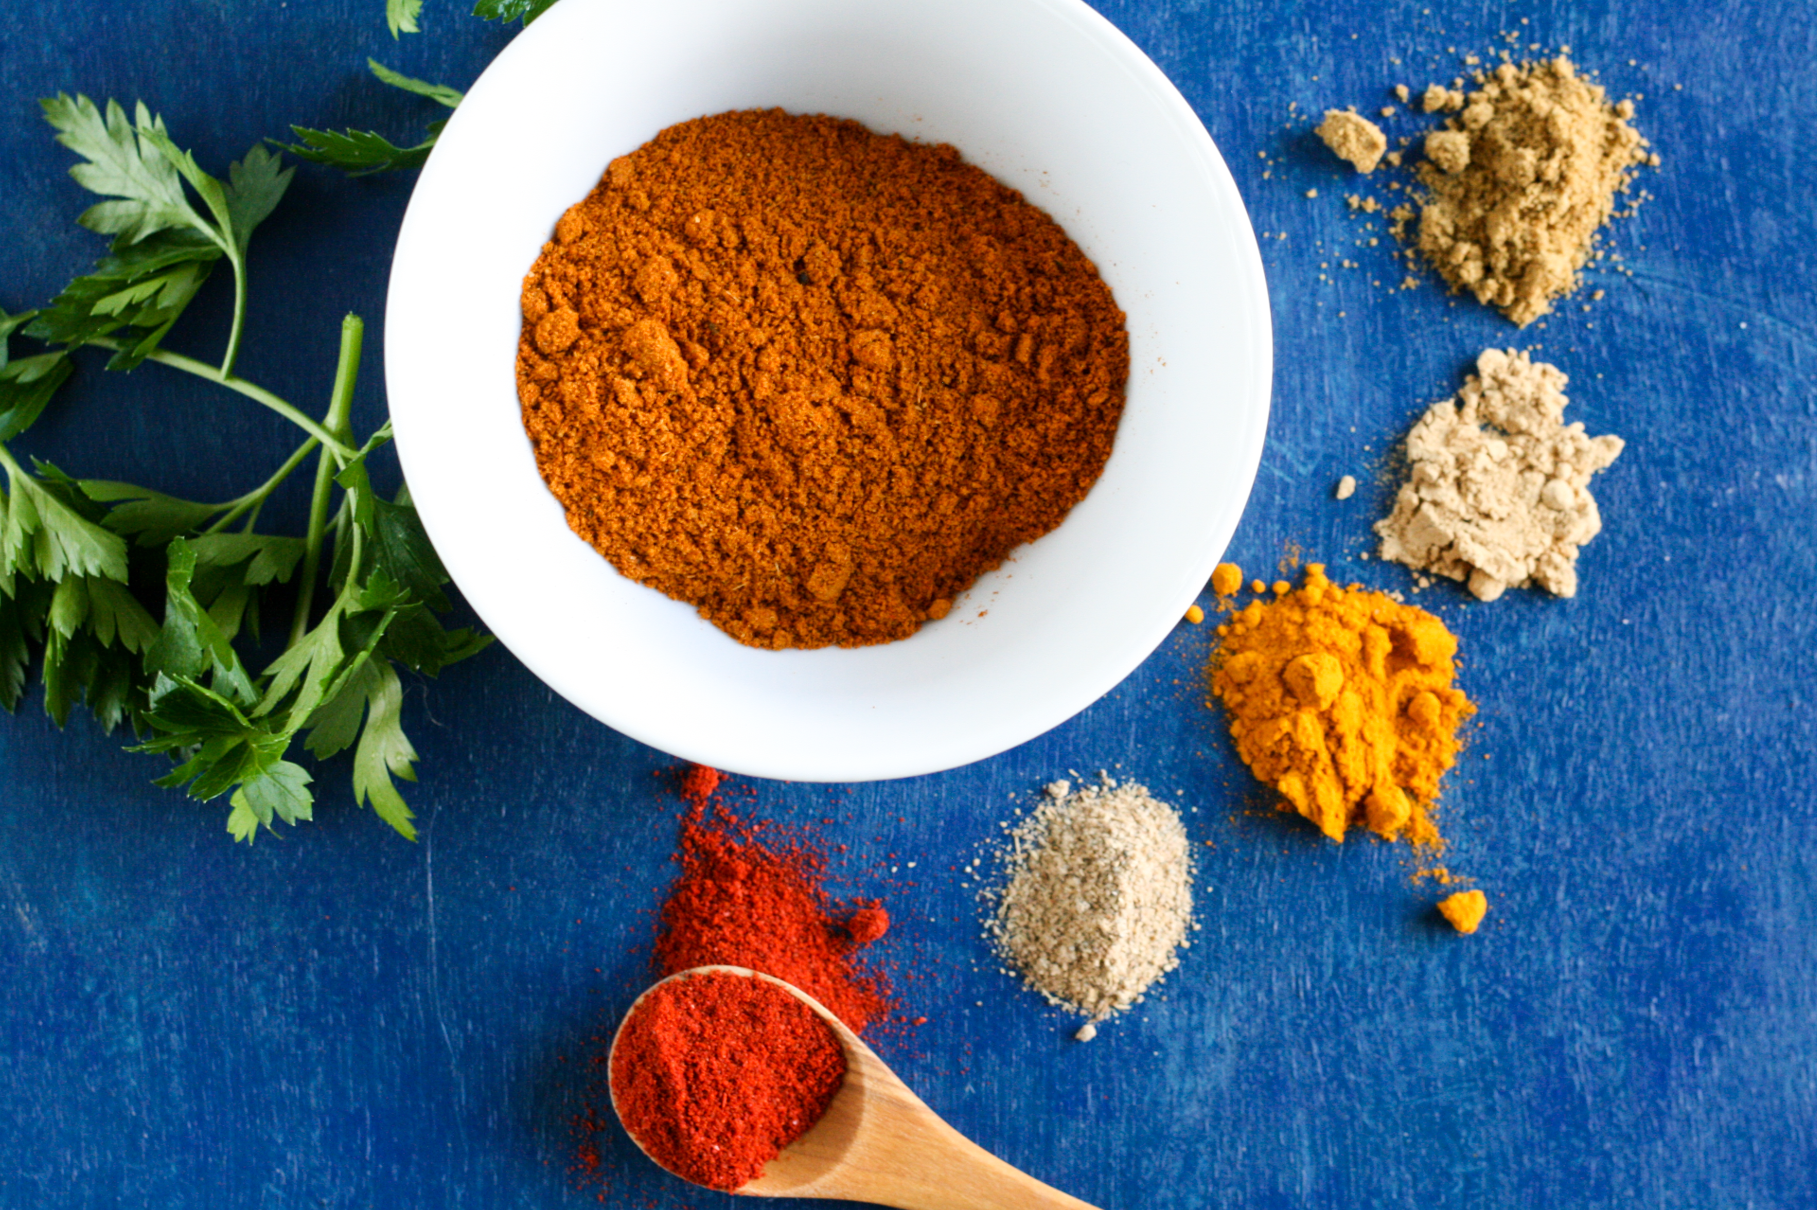 https://simplesassyscrumptious.com/wp-content/uploads/2019/02/DIY-Curry-spice-blend-with-paprika.png